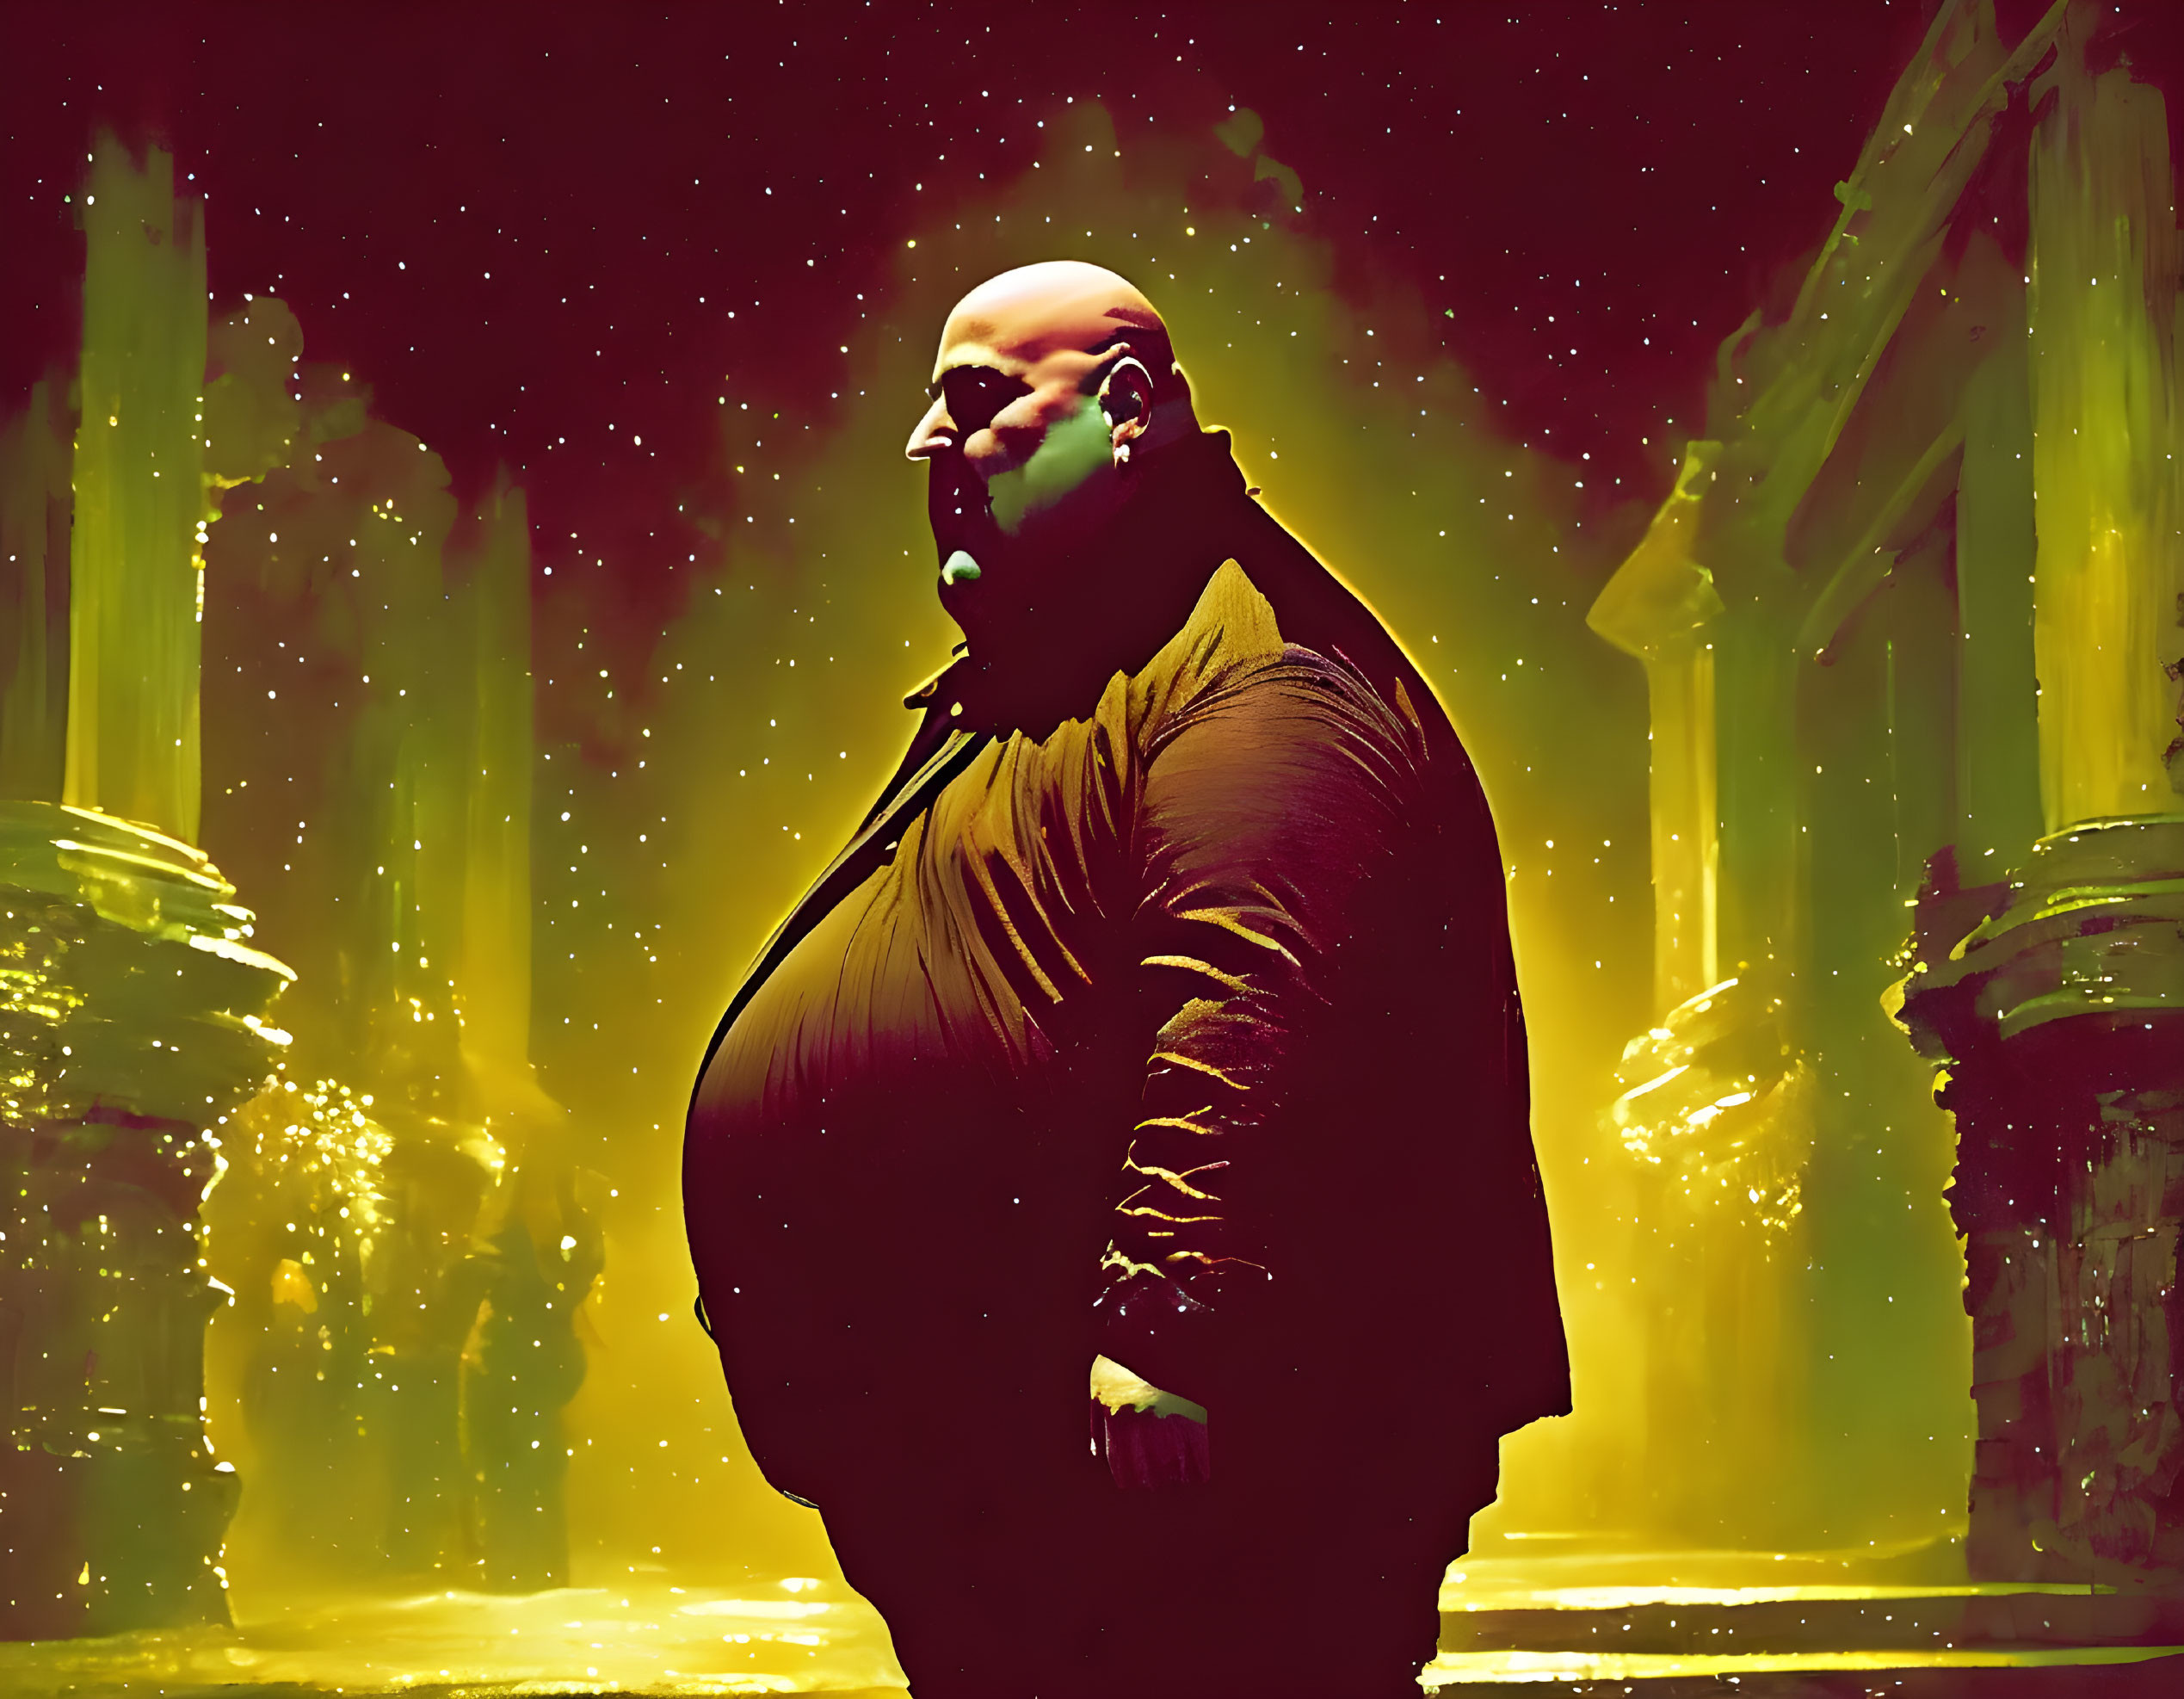 Kingpin in his own right, lost in the night 